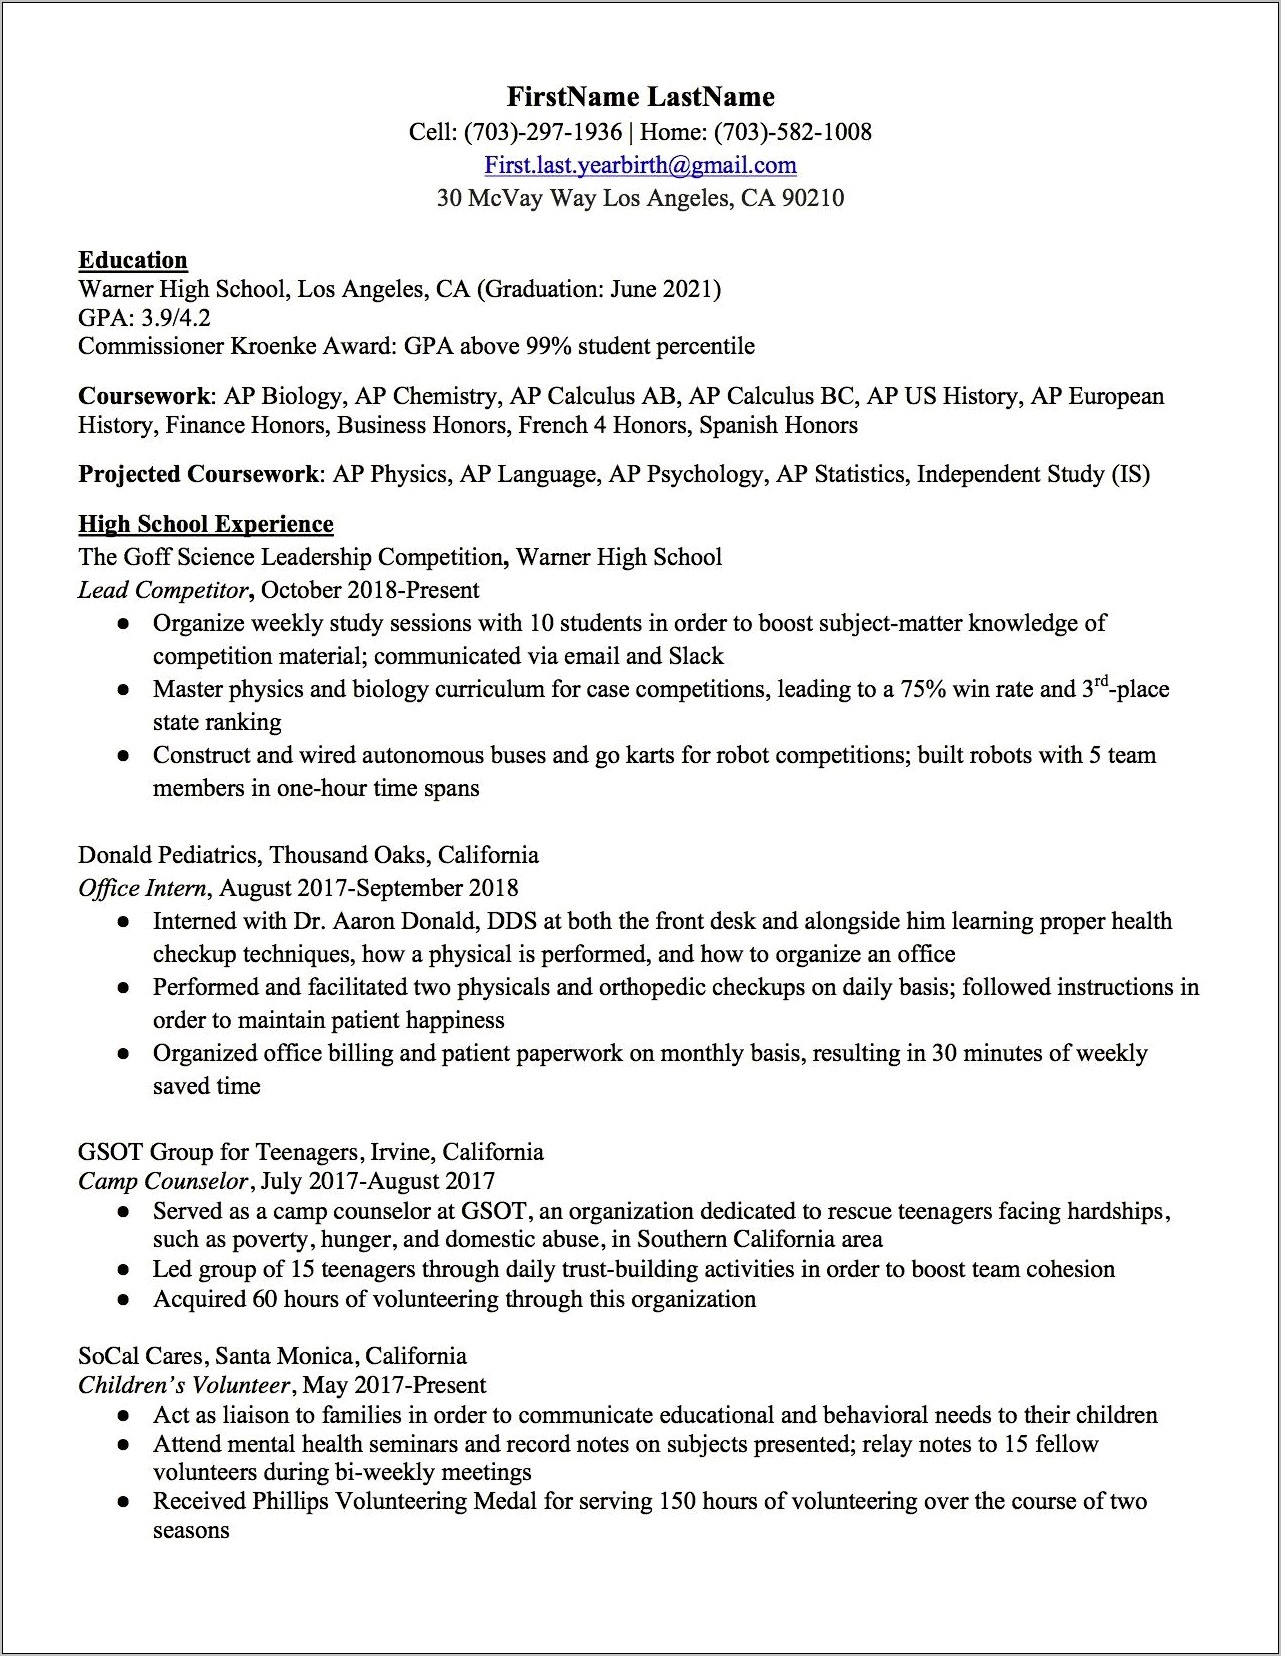 Resume Assignments For High School Students